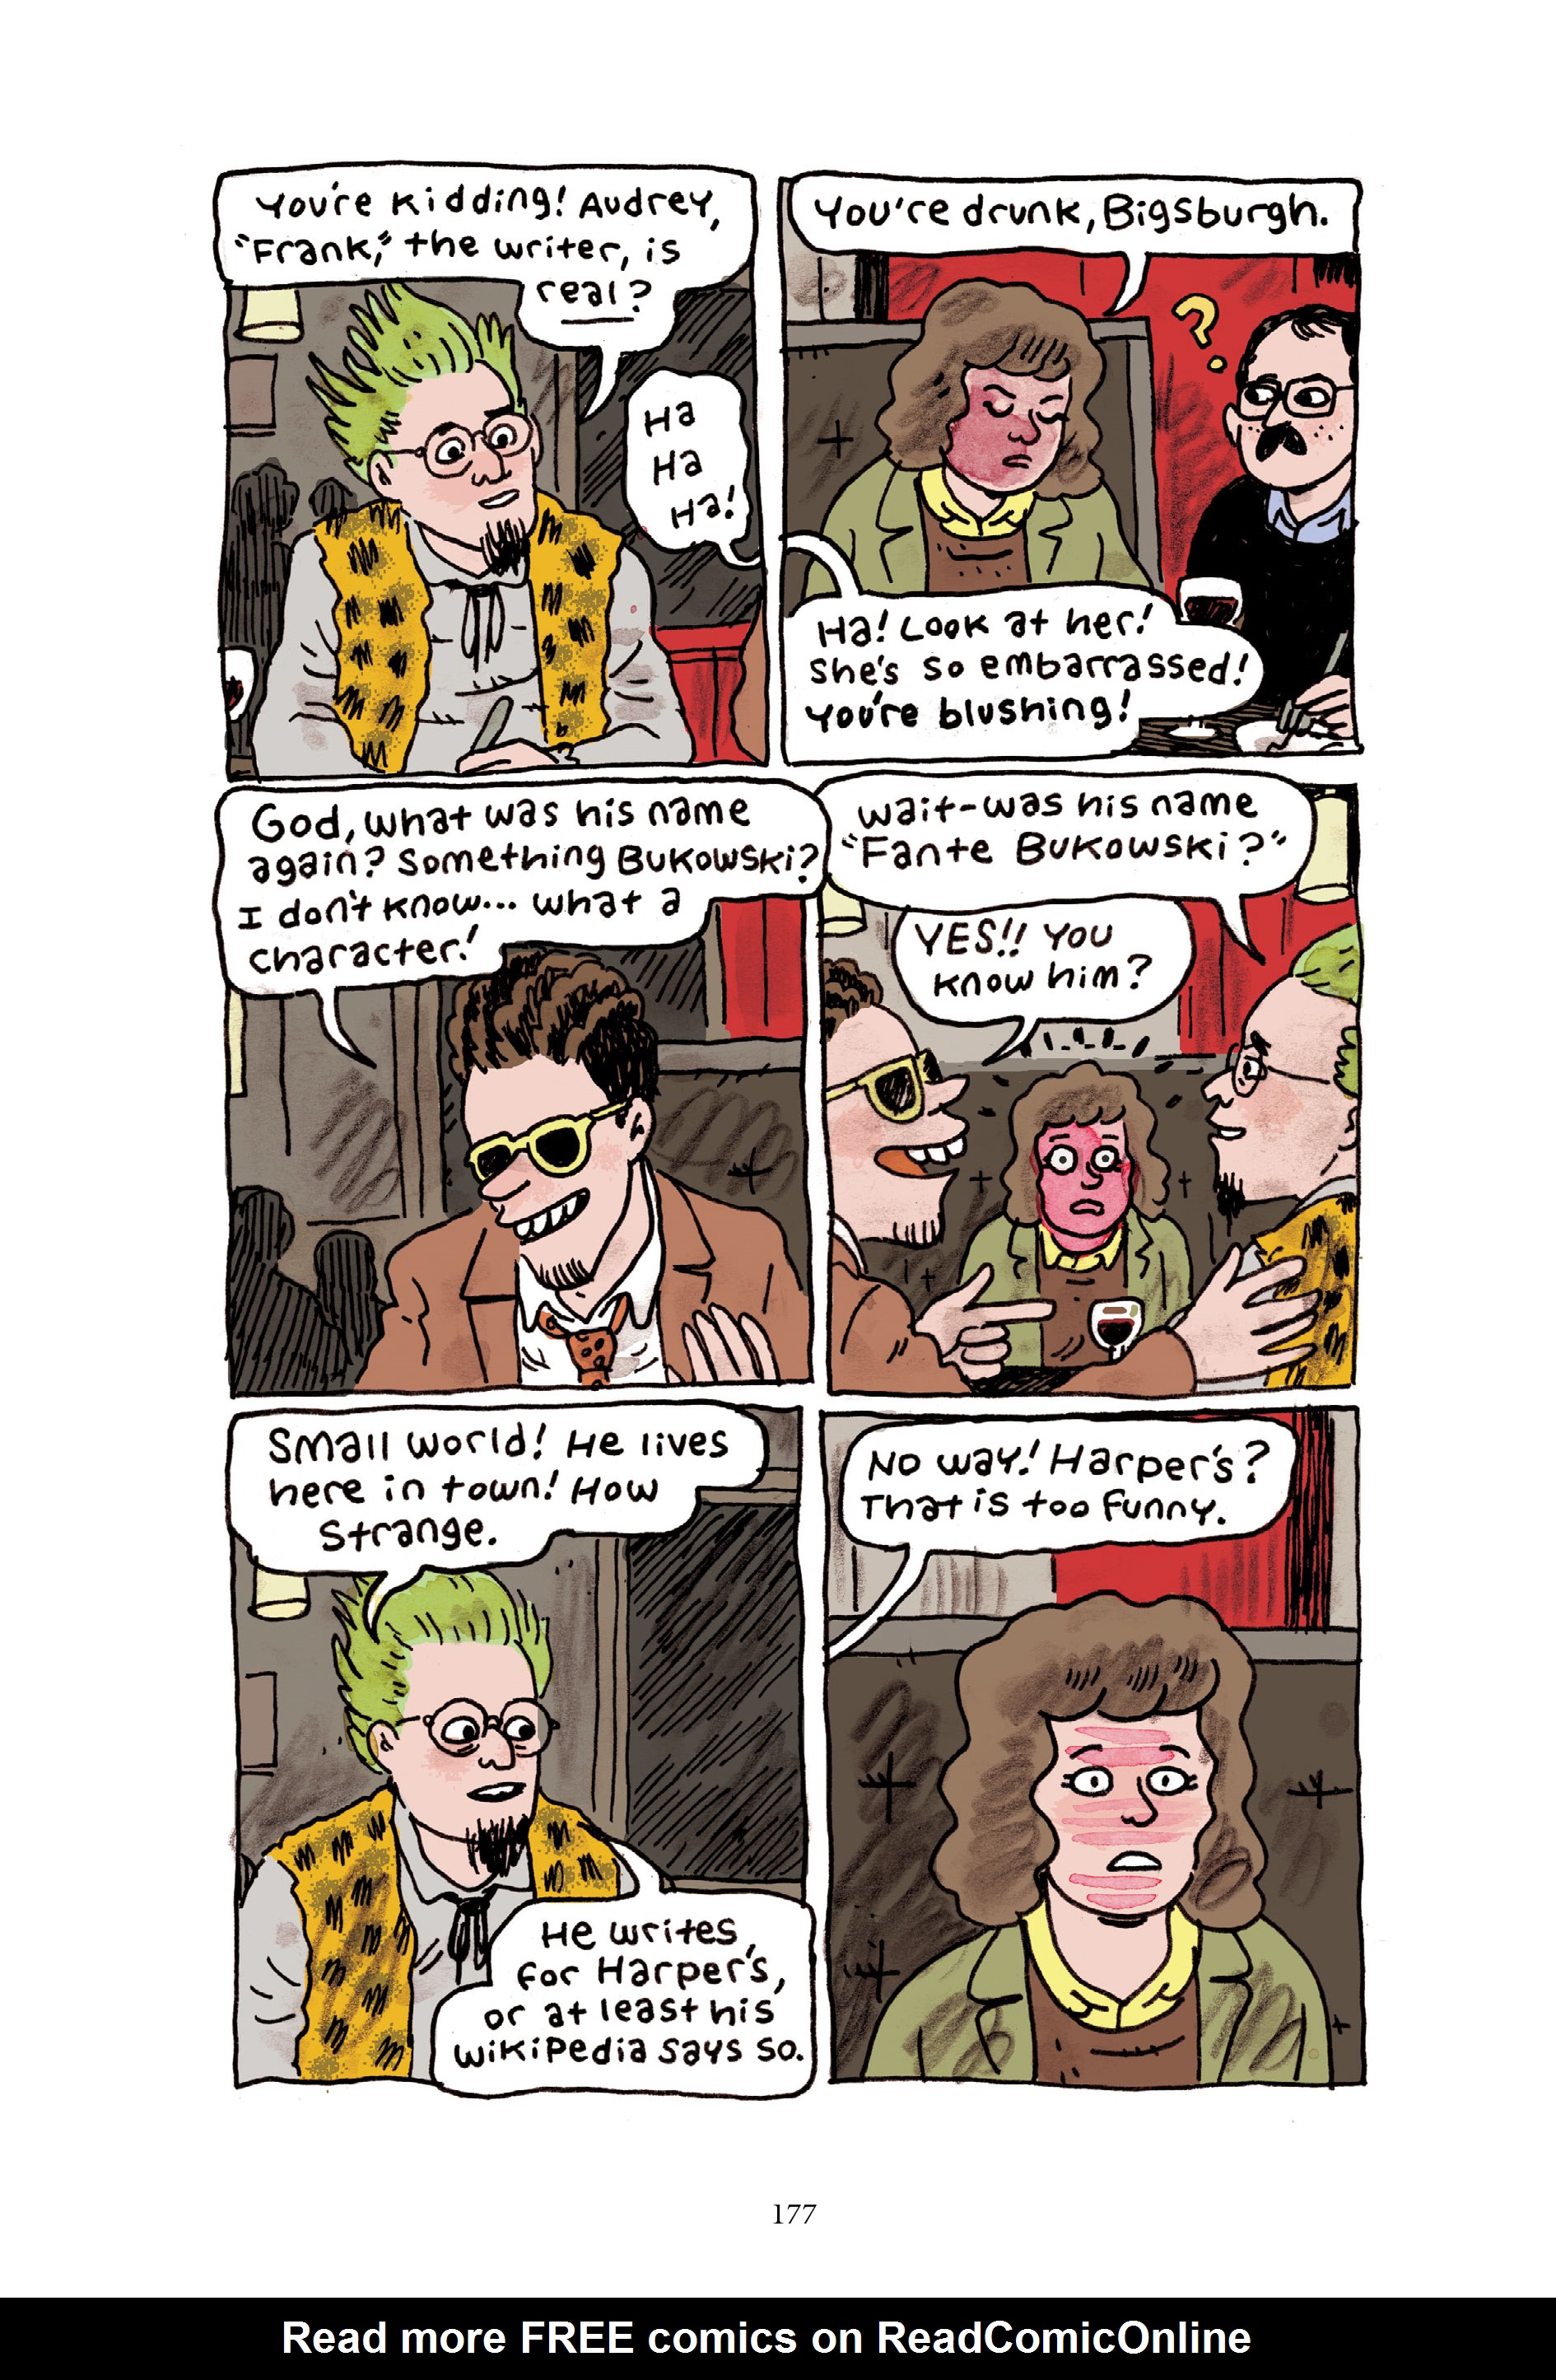 Read online The Complete Works of Fante Bukowski comic -  Issue # TPB (Part 2) - 75